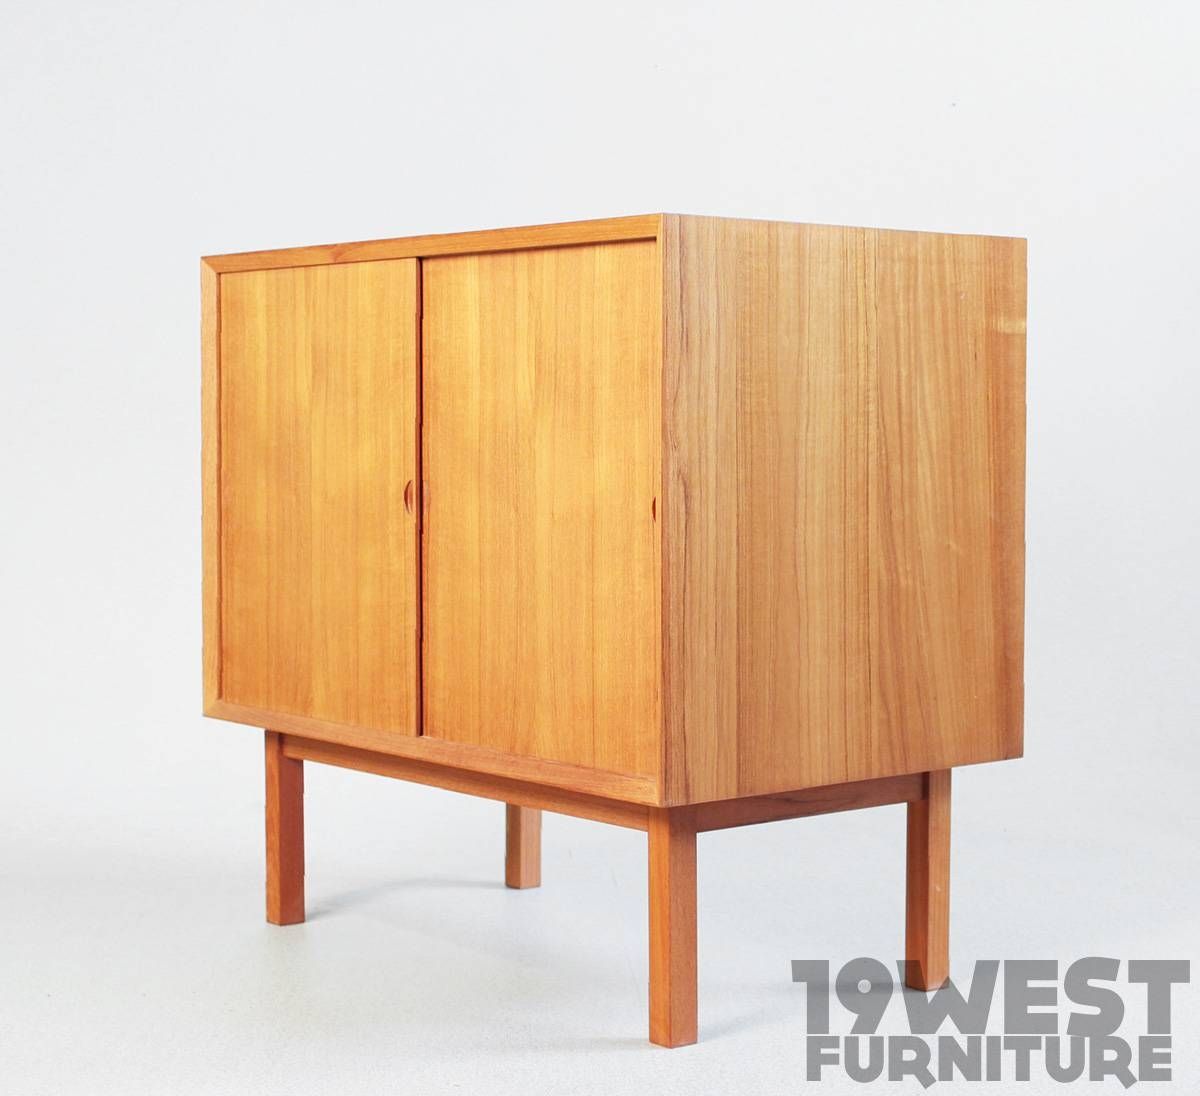 Kleine Sideboards, Poul Cadovius | 19 West Pertaining To Kleine Sideboards (View 9 of 15)